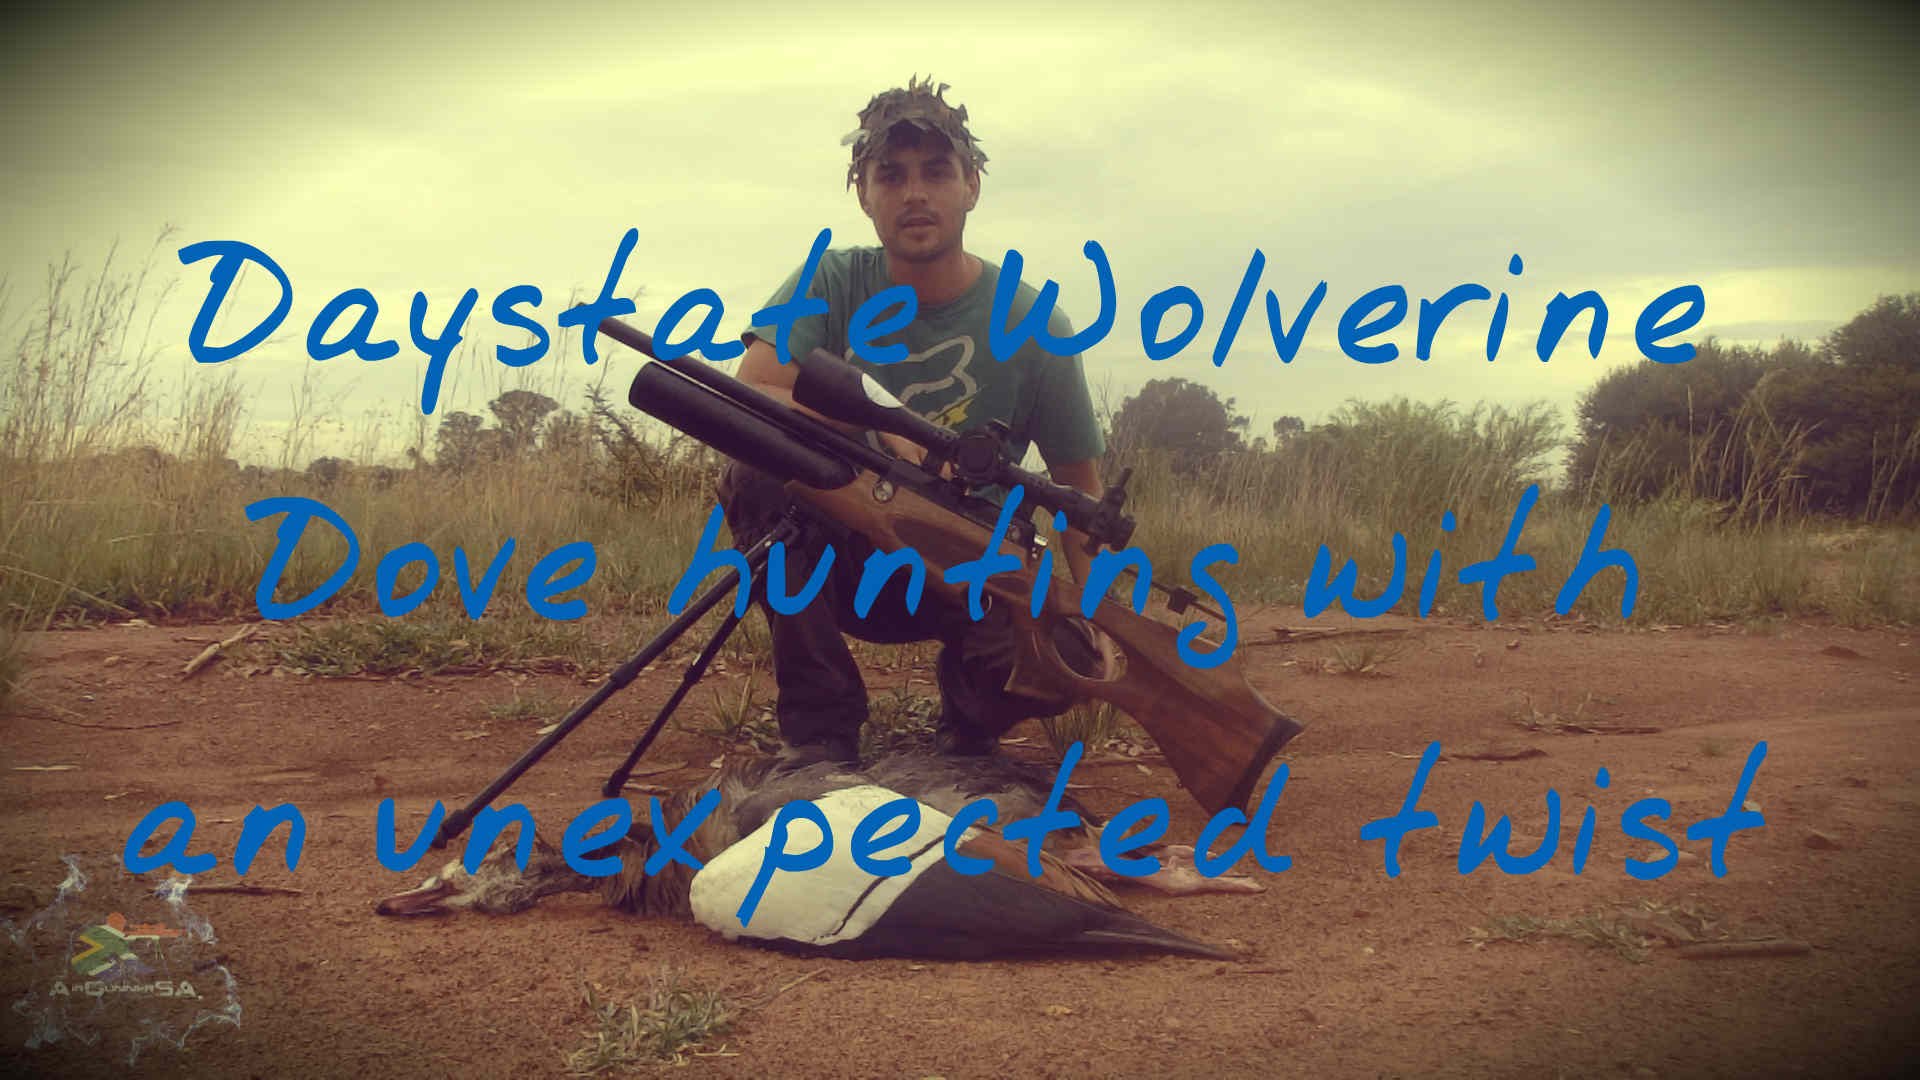 Daystate Wolverine Dove hunting with an unexpected twist